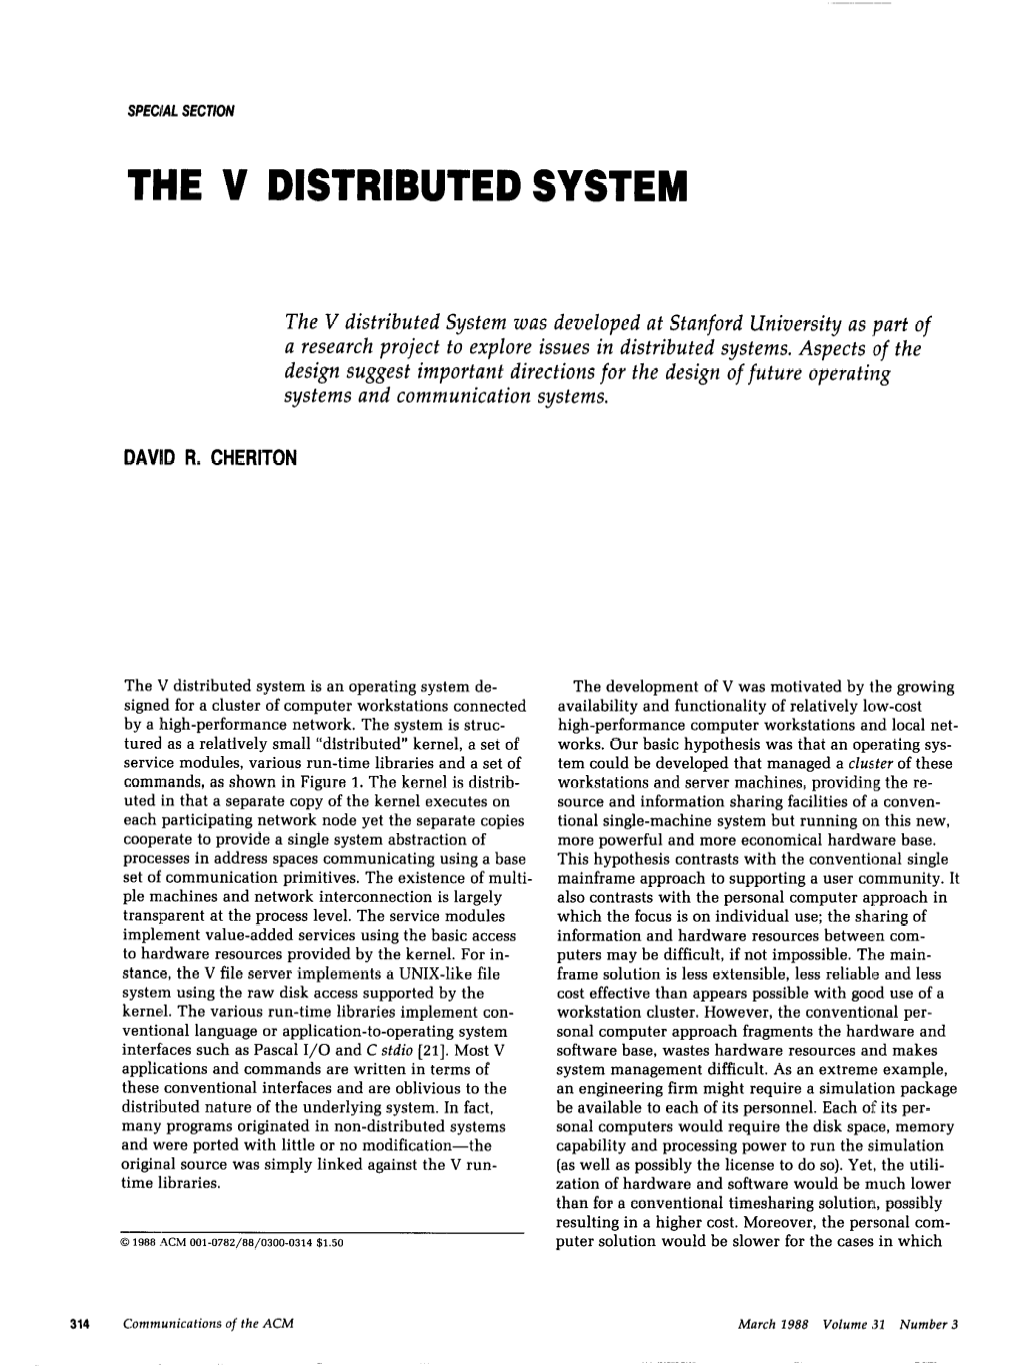 The V Distributed System